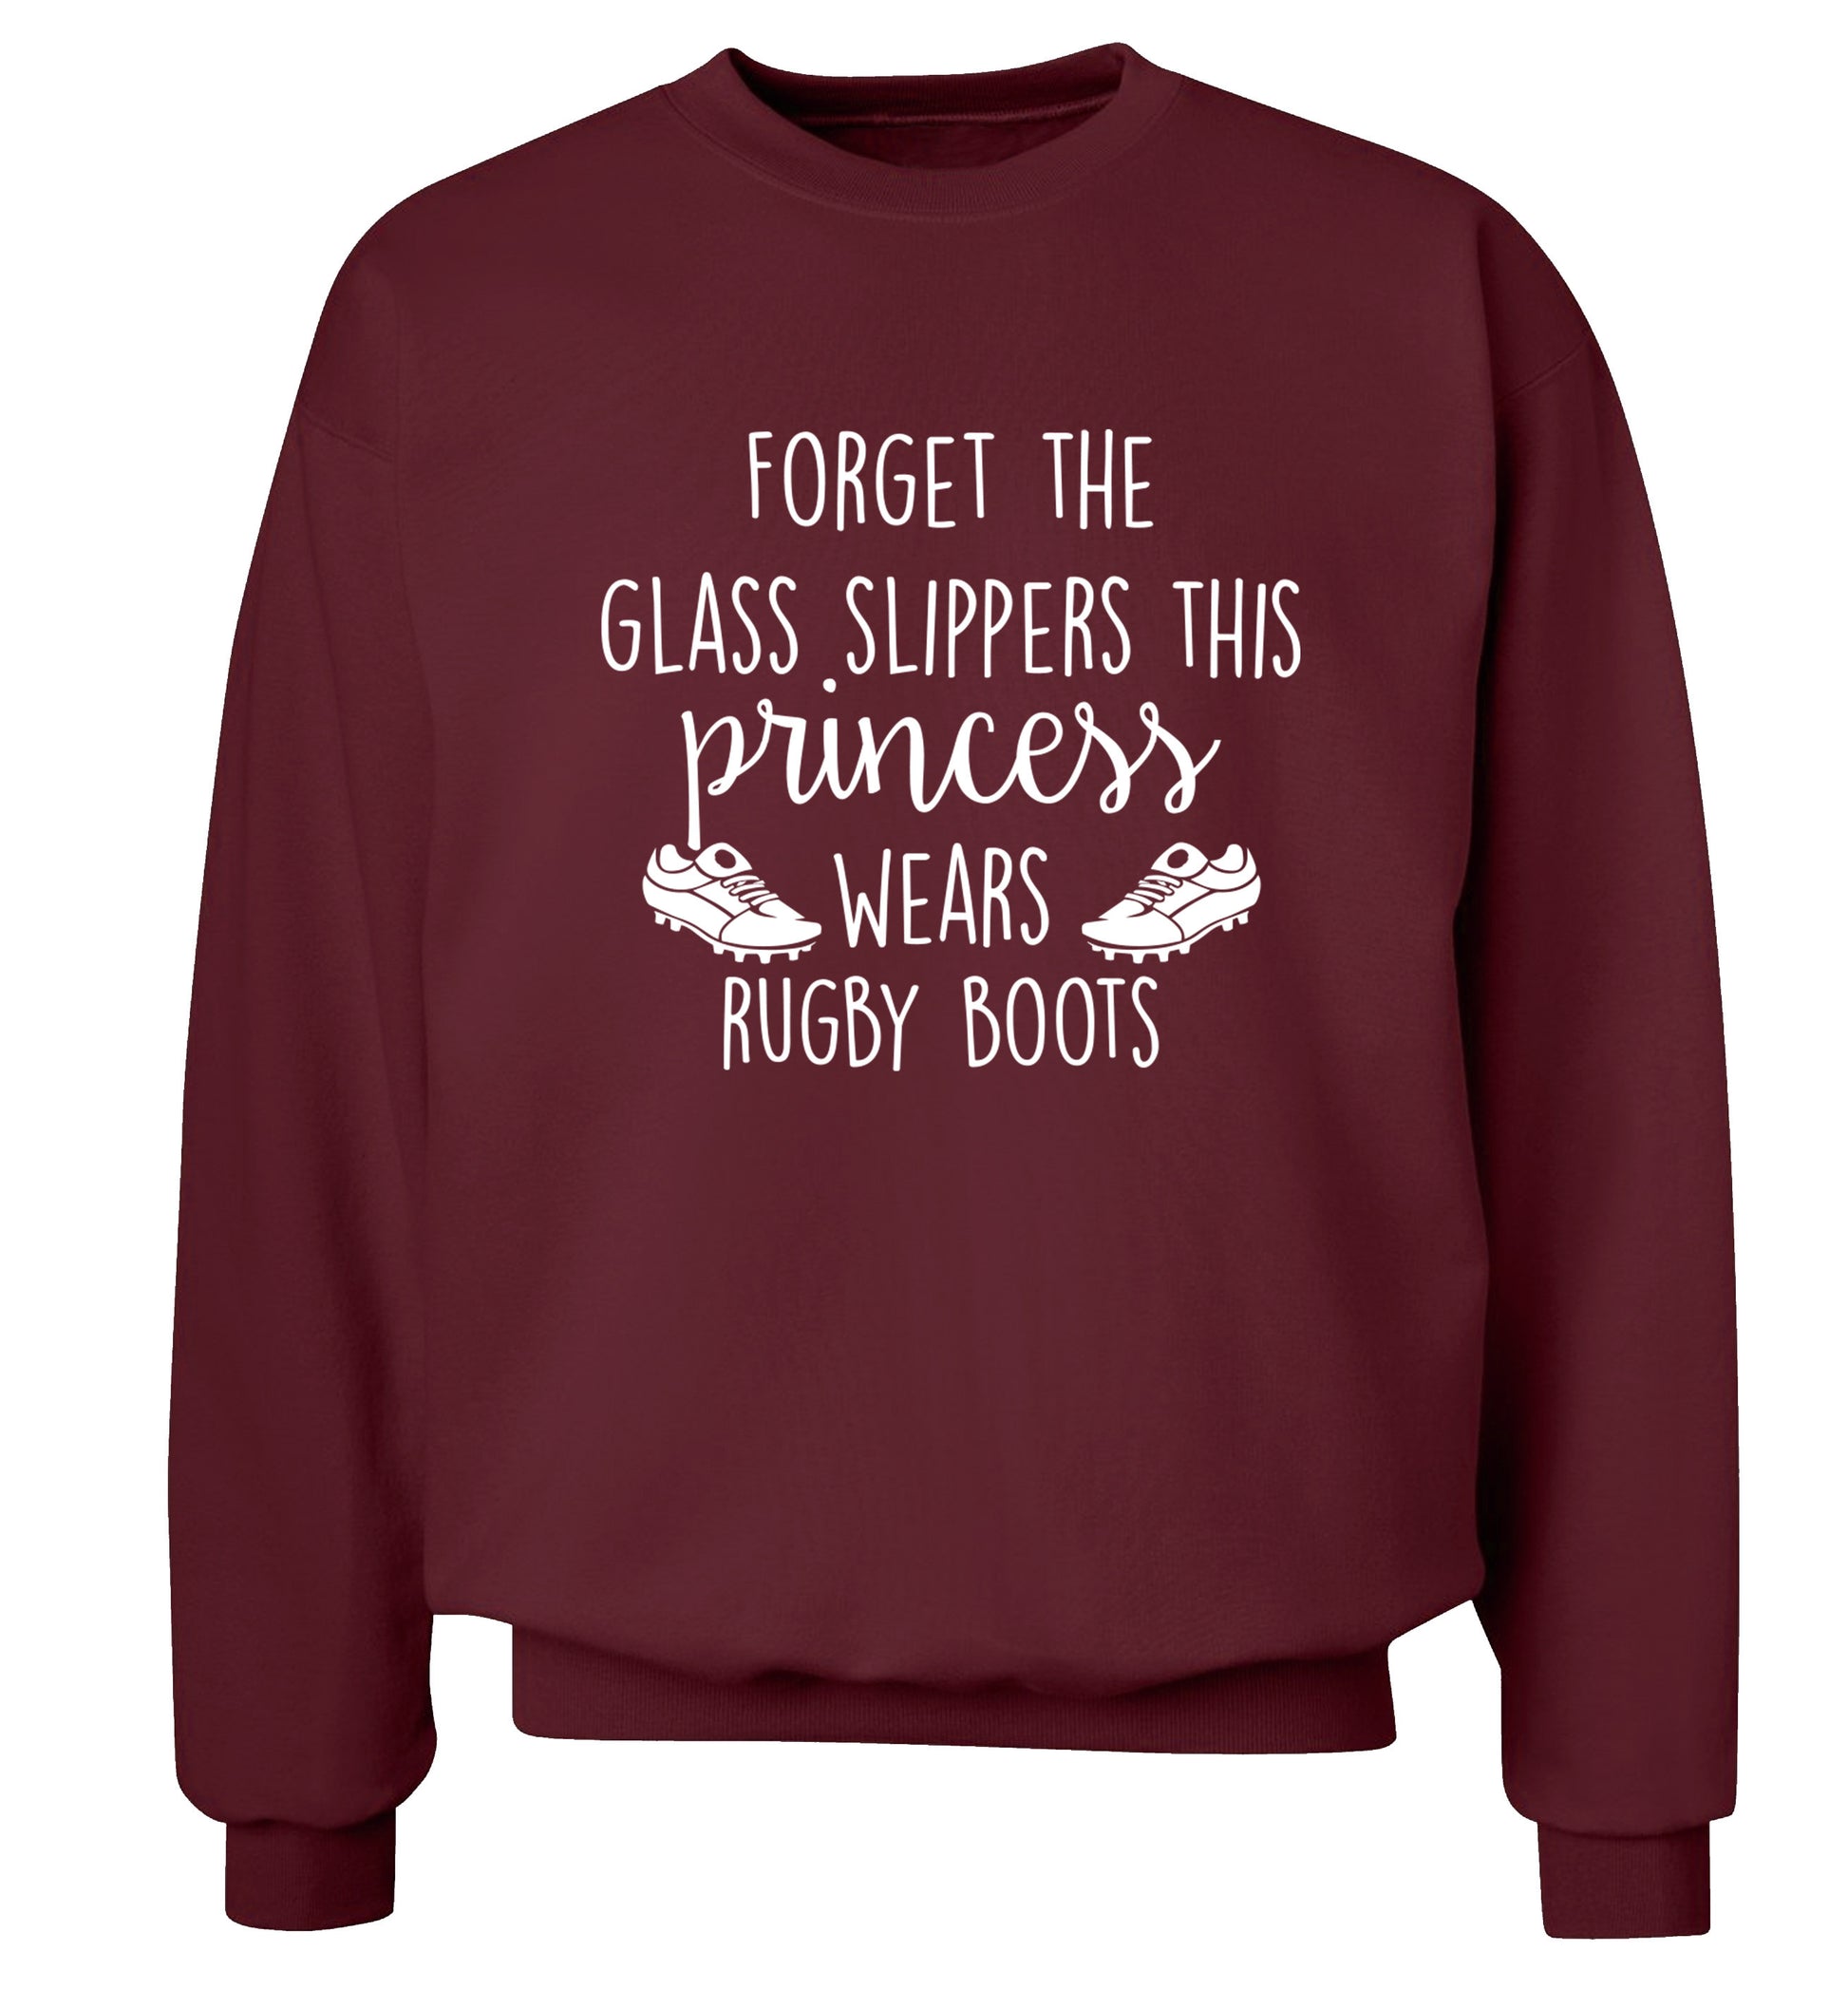 Forget the glass slippers this princess wears rugby boots Adult's unisex maroon Sweater 2XL